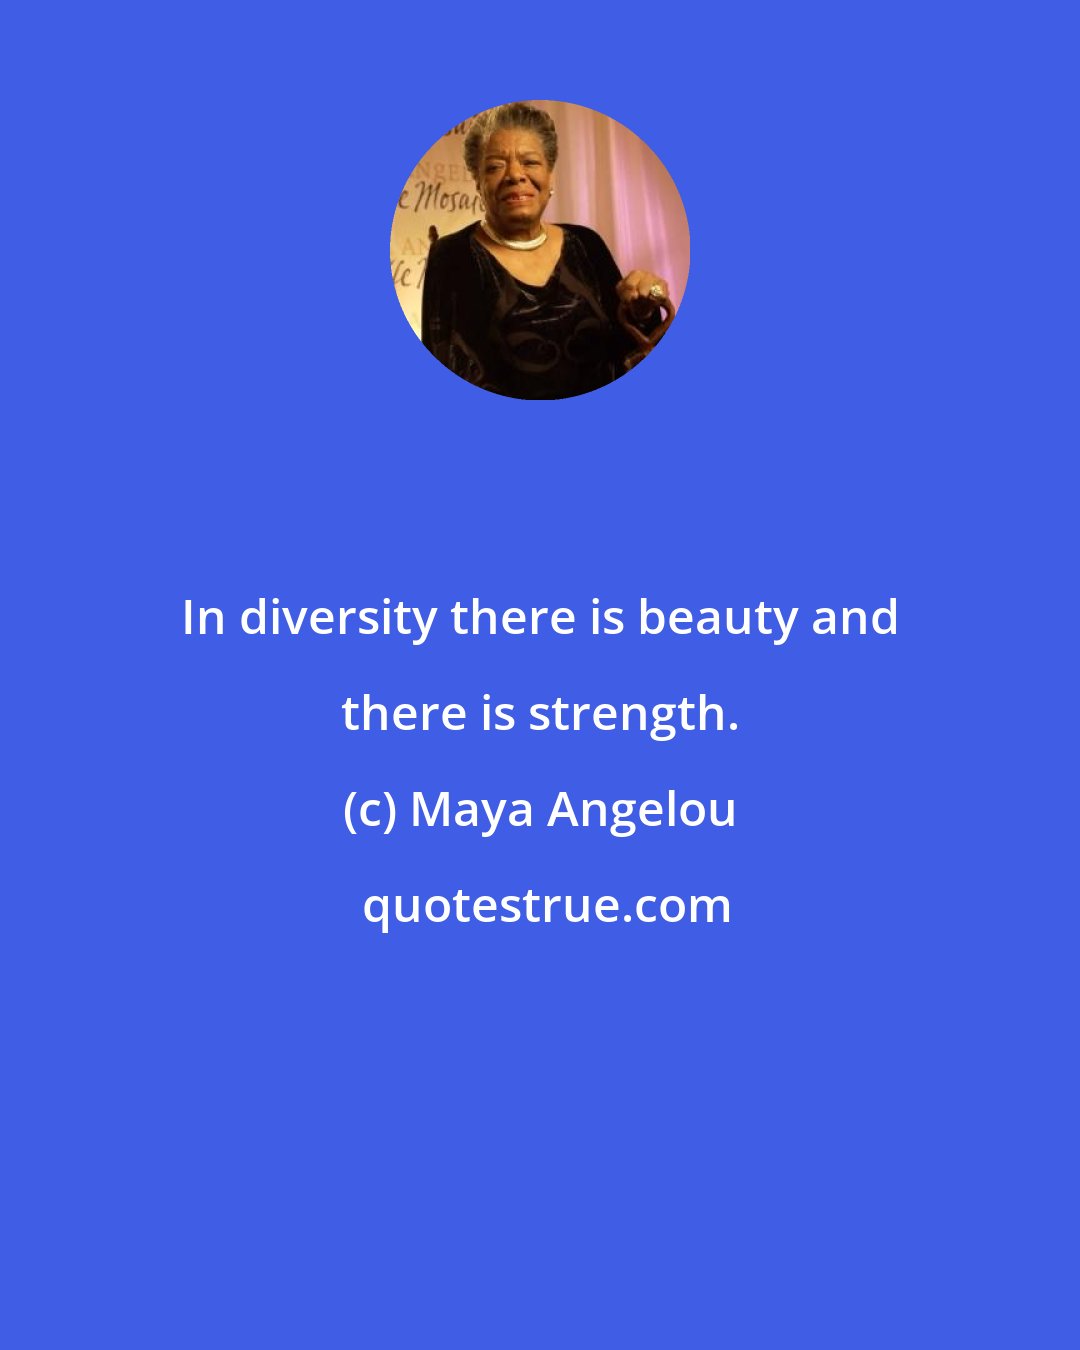 Maya Angelou: In diversity there is beauty and there is strength.